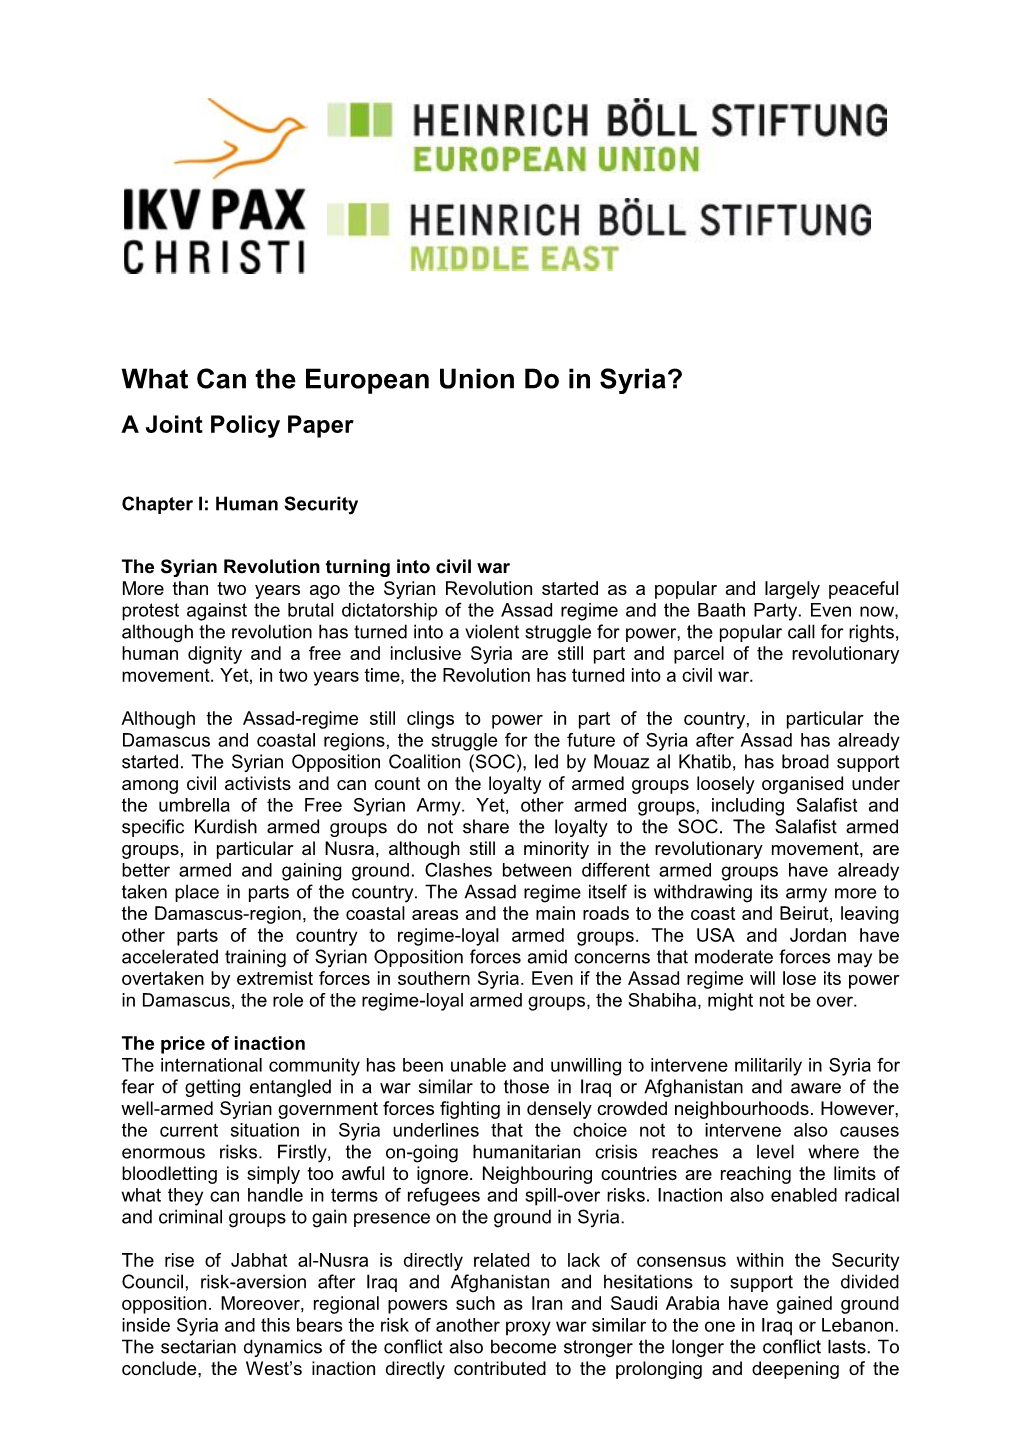 What Can the European Union Do in Syria? a Joint Policy Paper